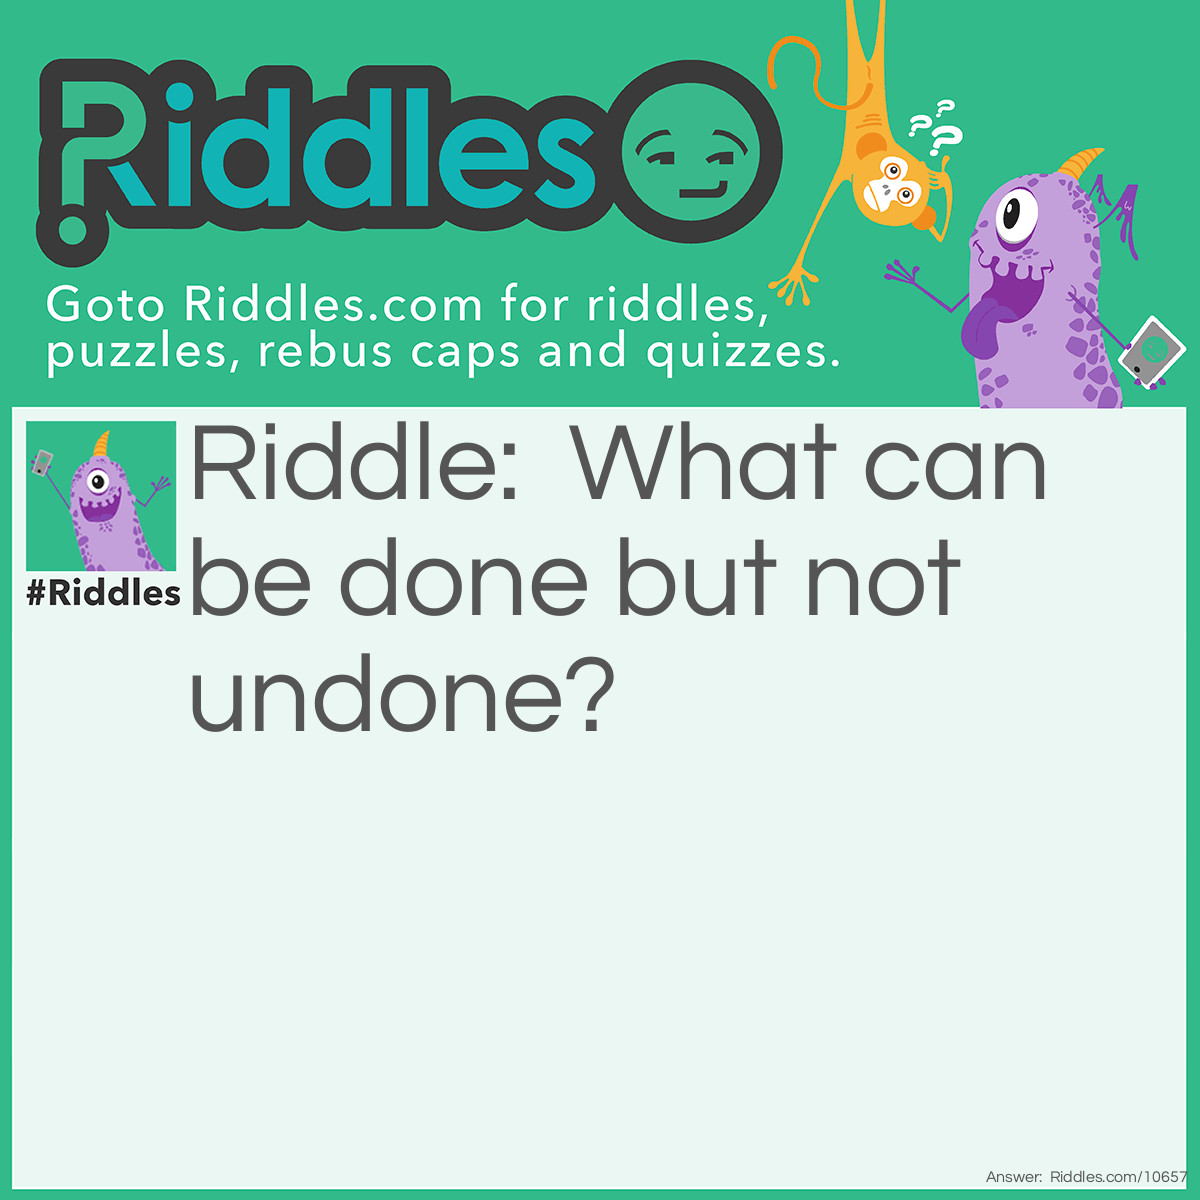 Riddle: What can be done but not undone? Answer: A rude word to someone.